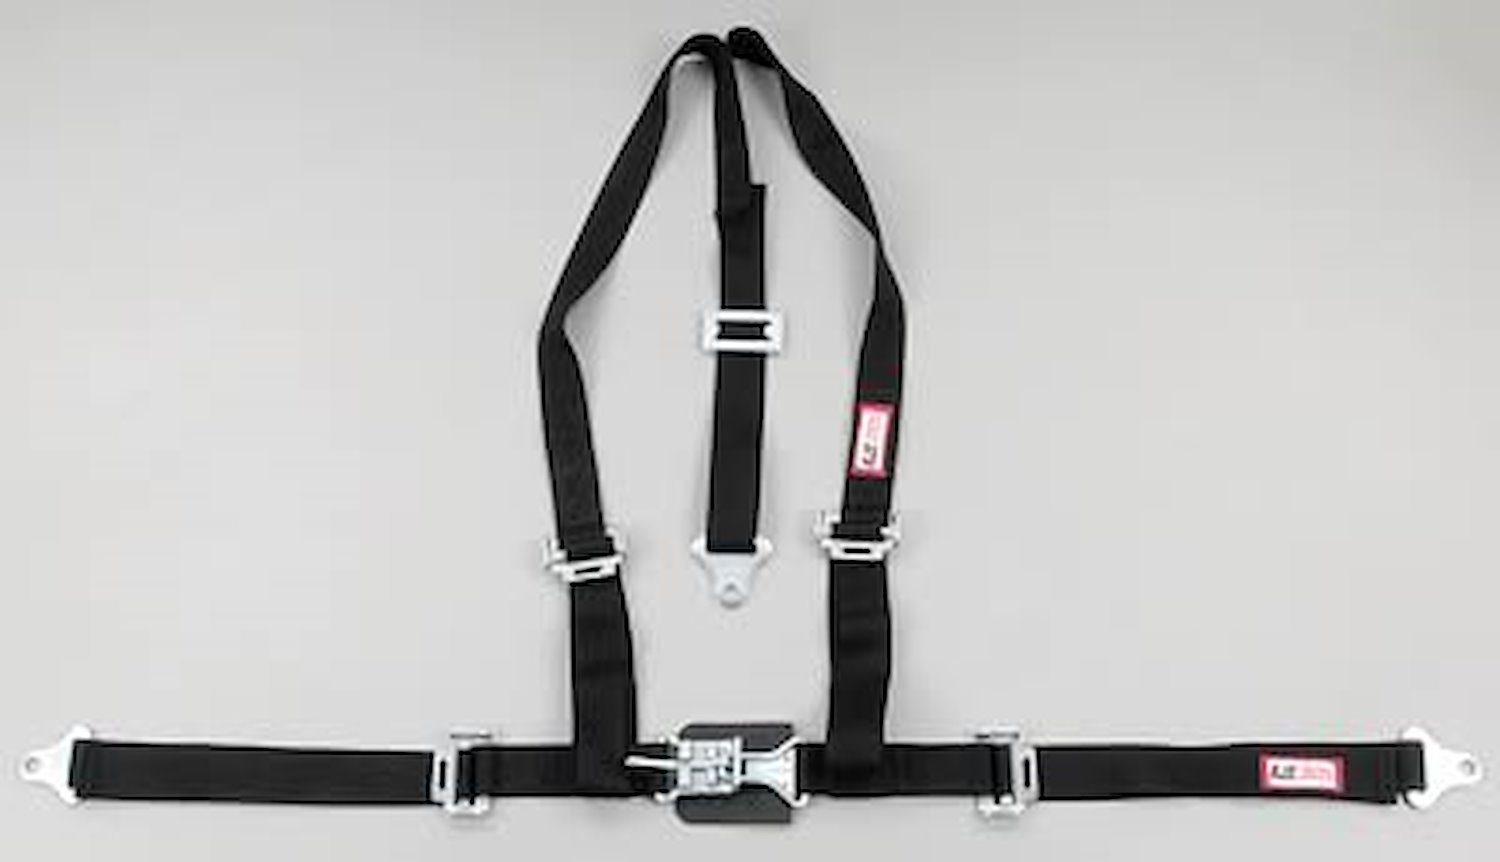 NON-SFI L&L HARNESS 2 PULL UP Lap Belt SNAP SEWN IN 2 S.H. Individual ROLL BAR Mount WRAP/BOLT GRAY